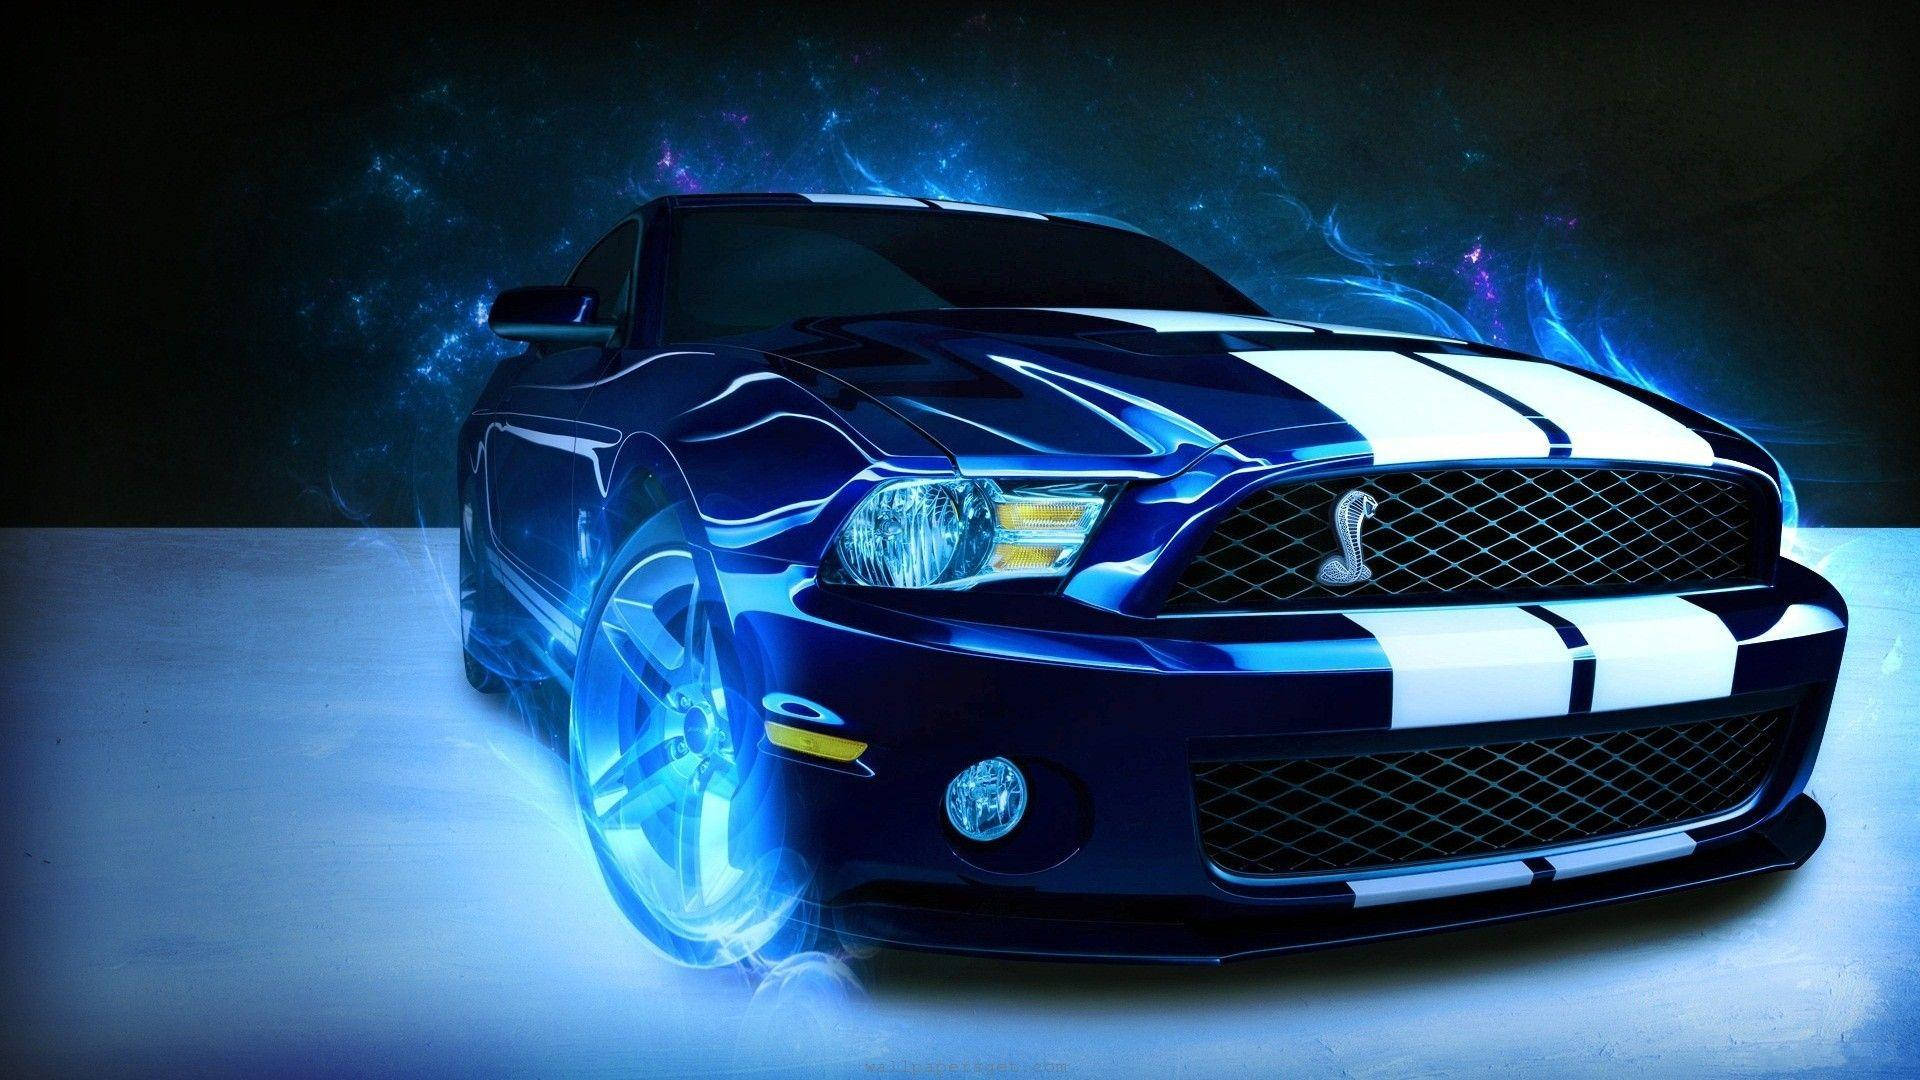 Blue Sports Car Ford Mustang Shelby Wallpaper